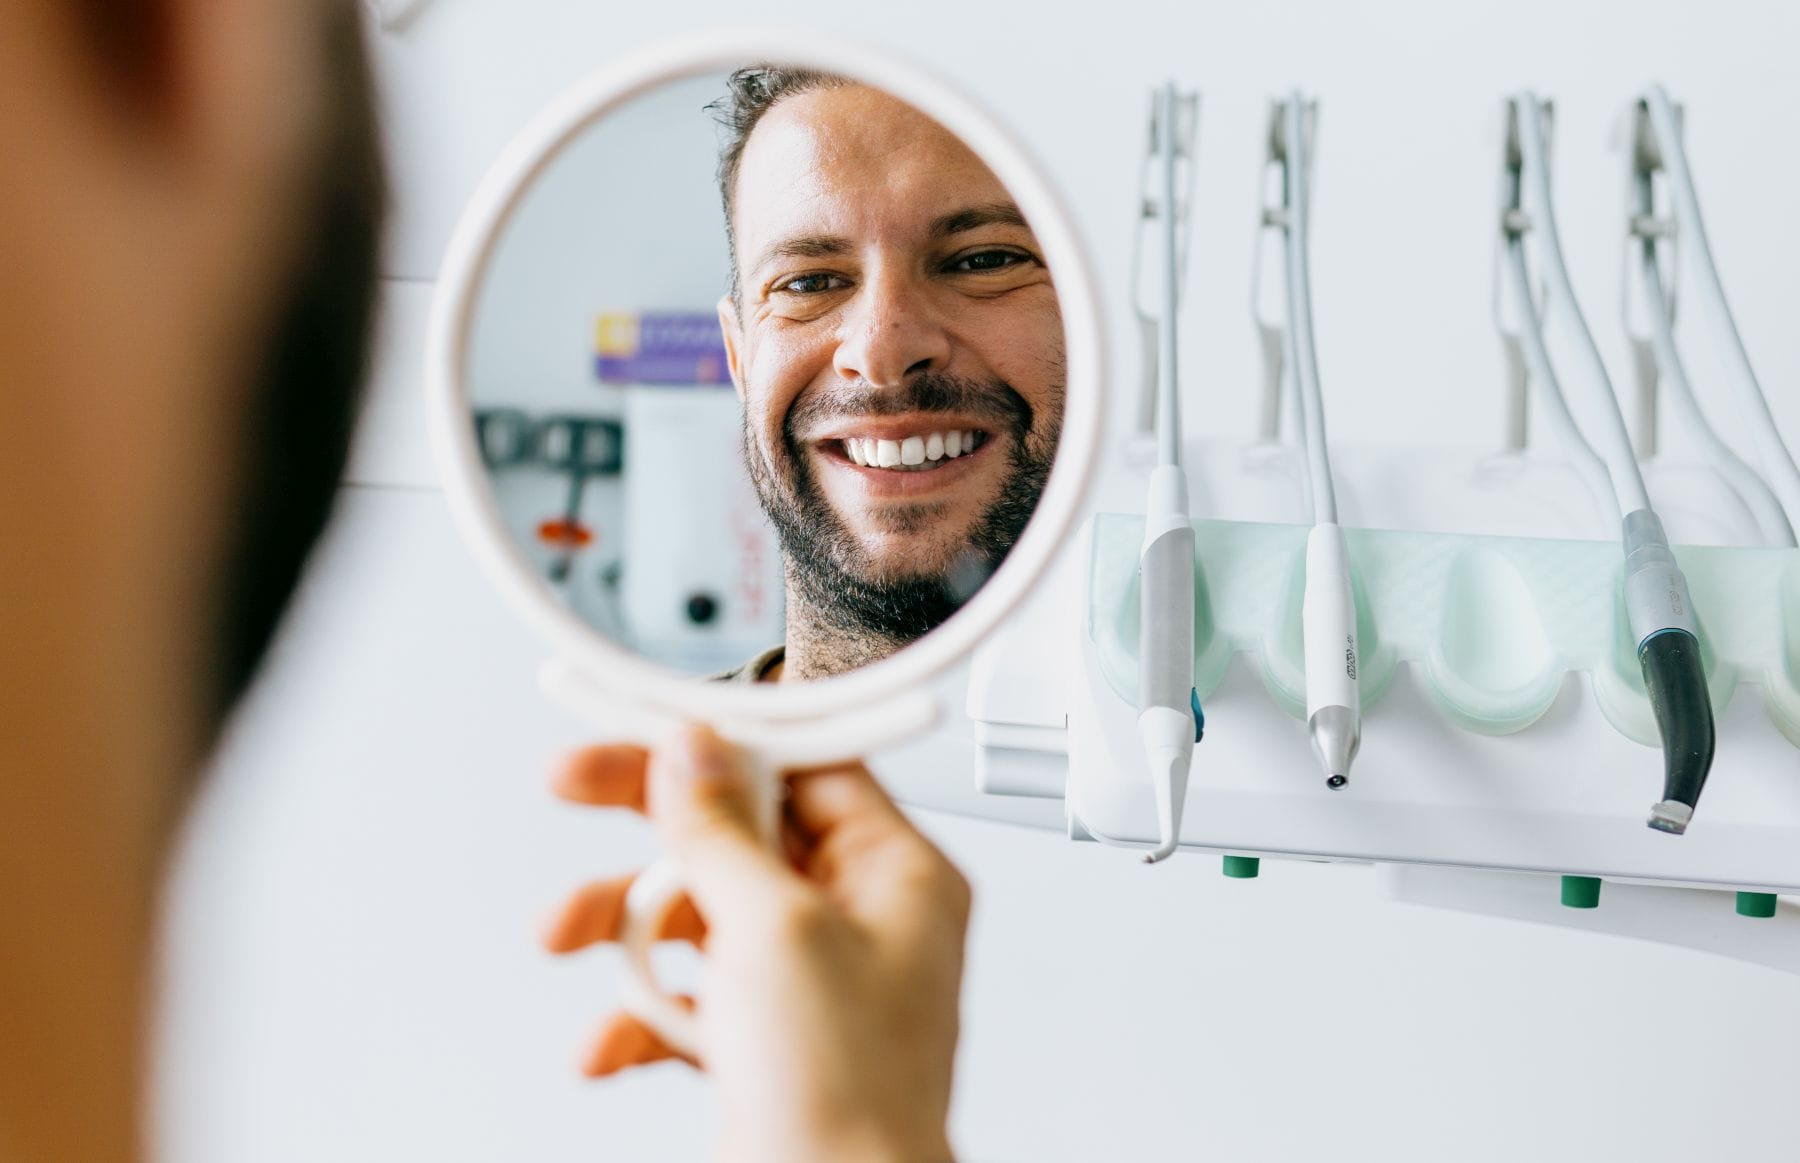 Satisfied man looks in the mirror and smiles after treatment at the dentist